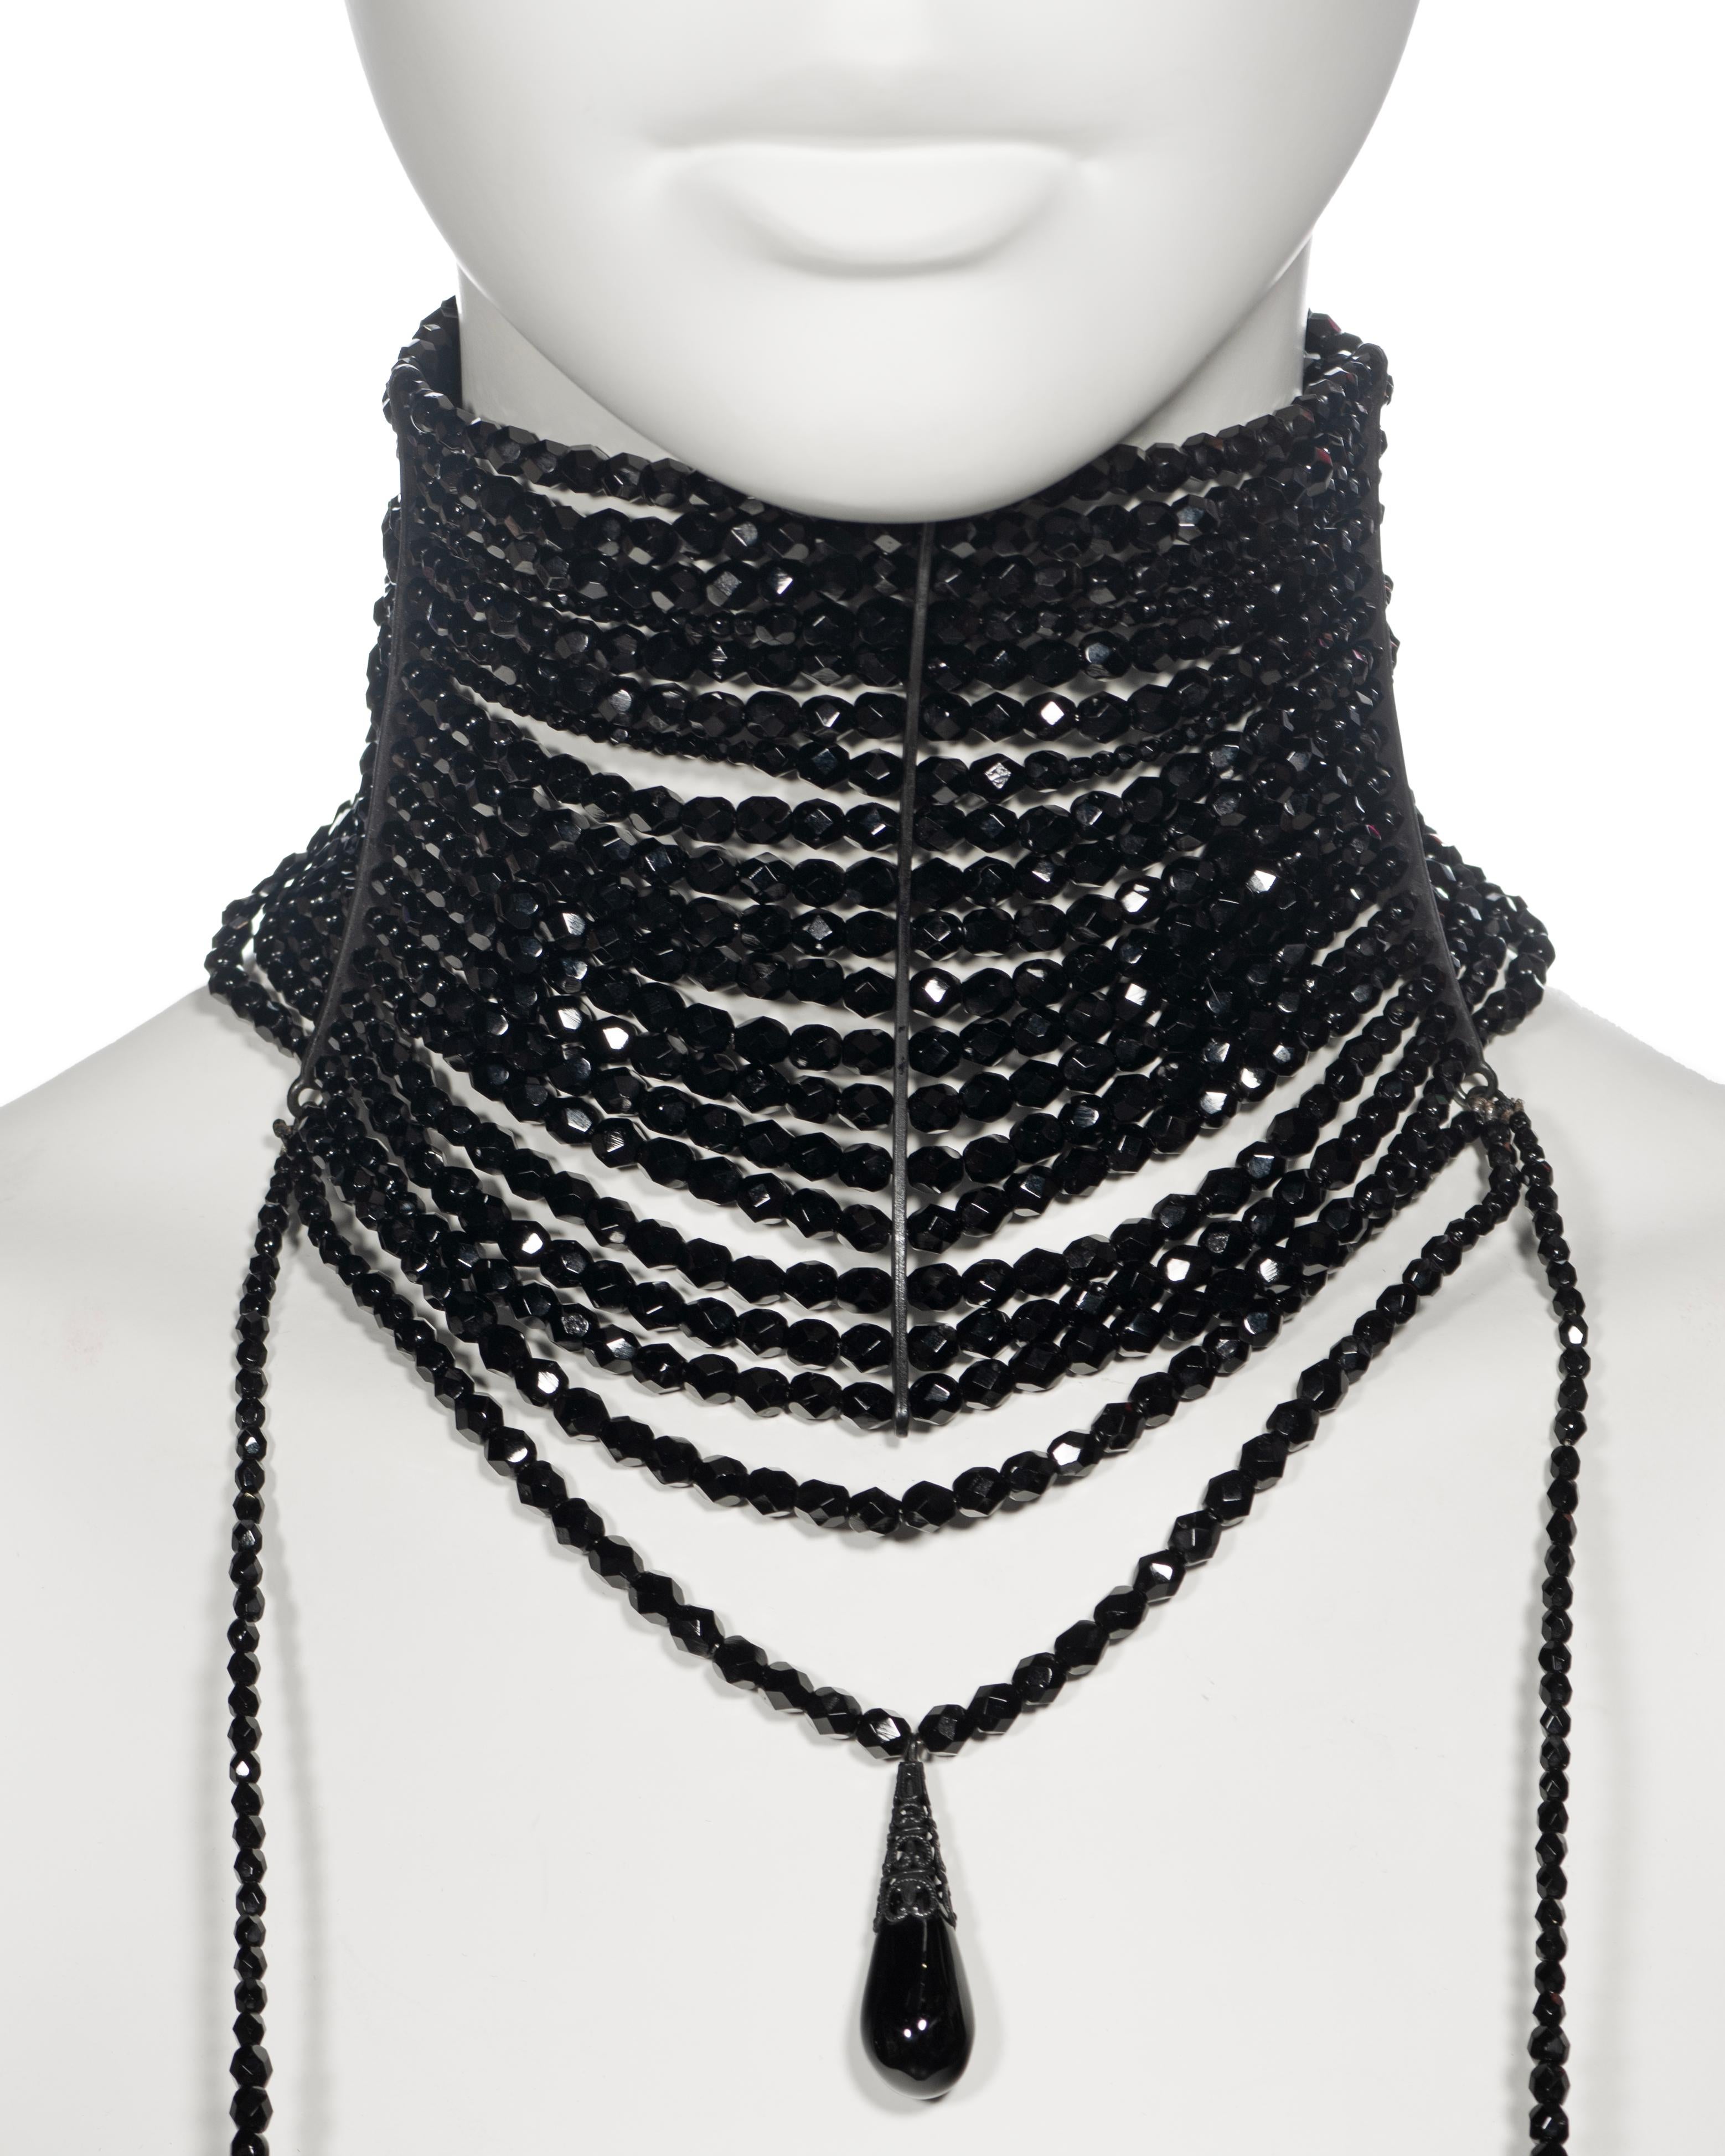 Christian Dior by John Galliano black beaded Masai choker necklace, ss 1999 In Excellent Condition For Sale In London, GB